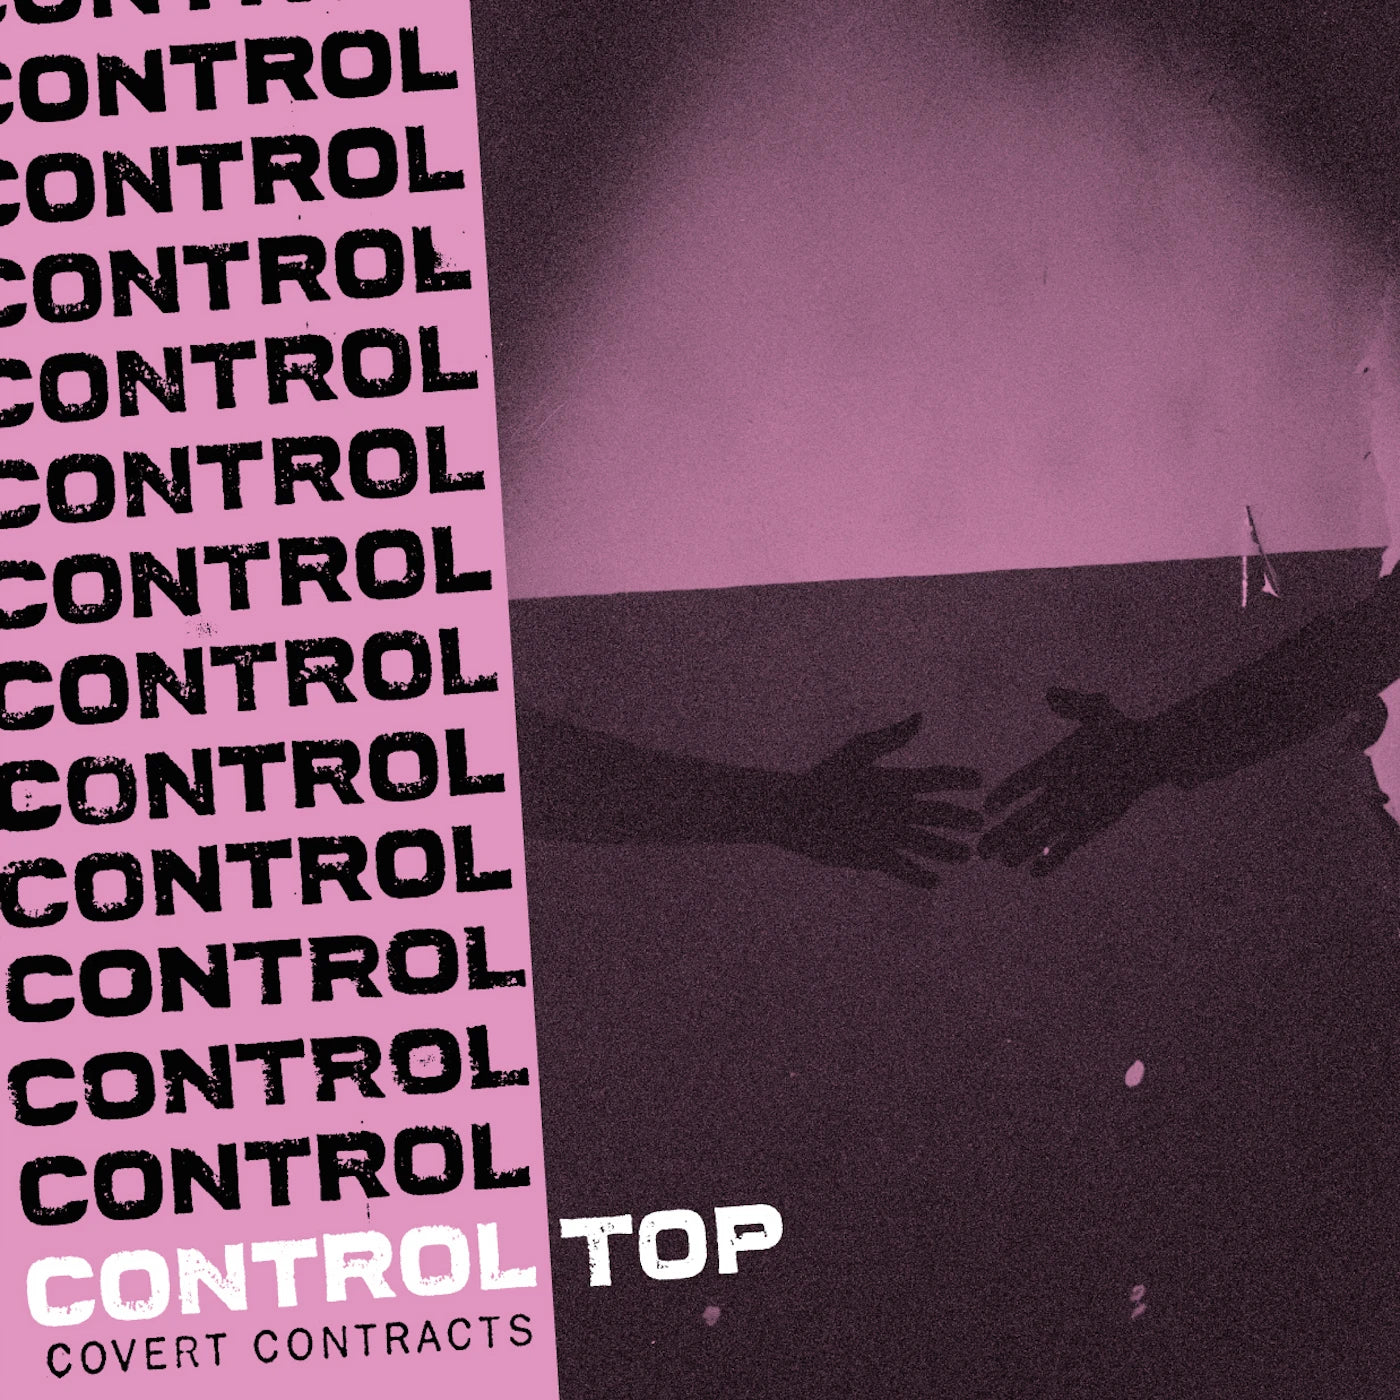 Control Top "Covert Contracts" (Bent & Dent)